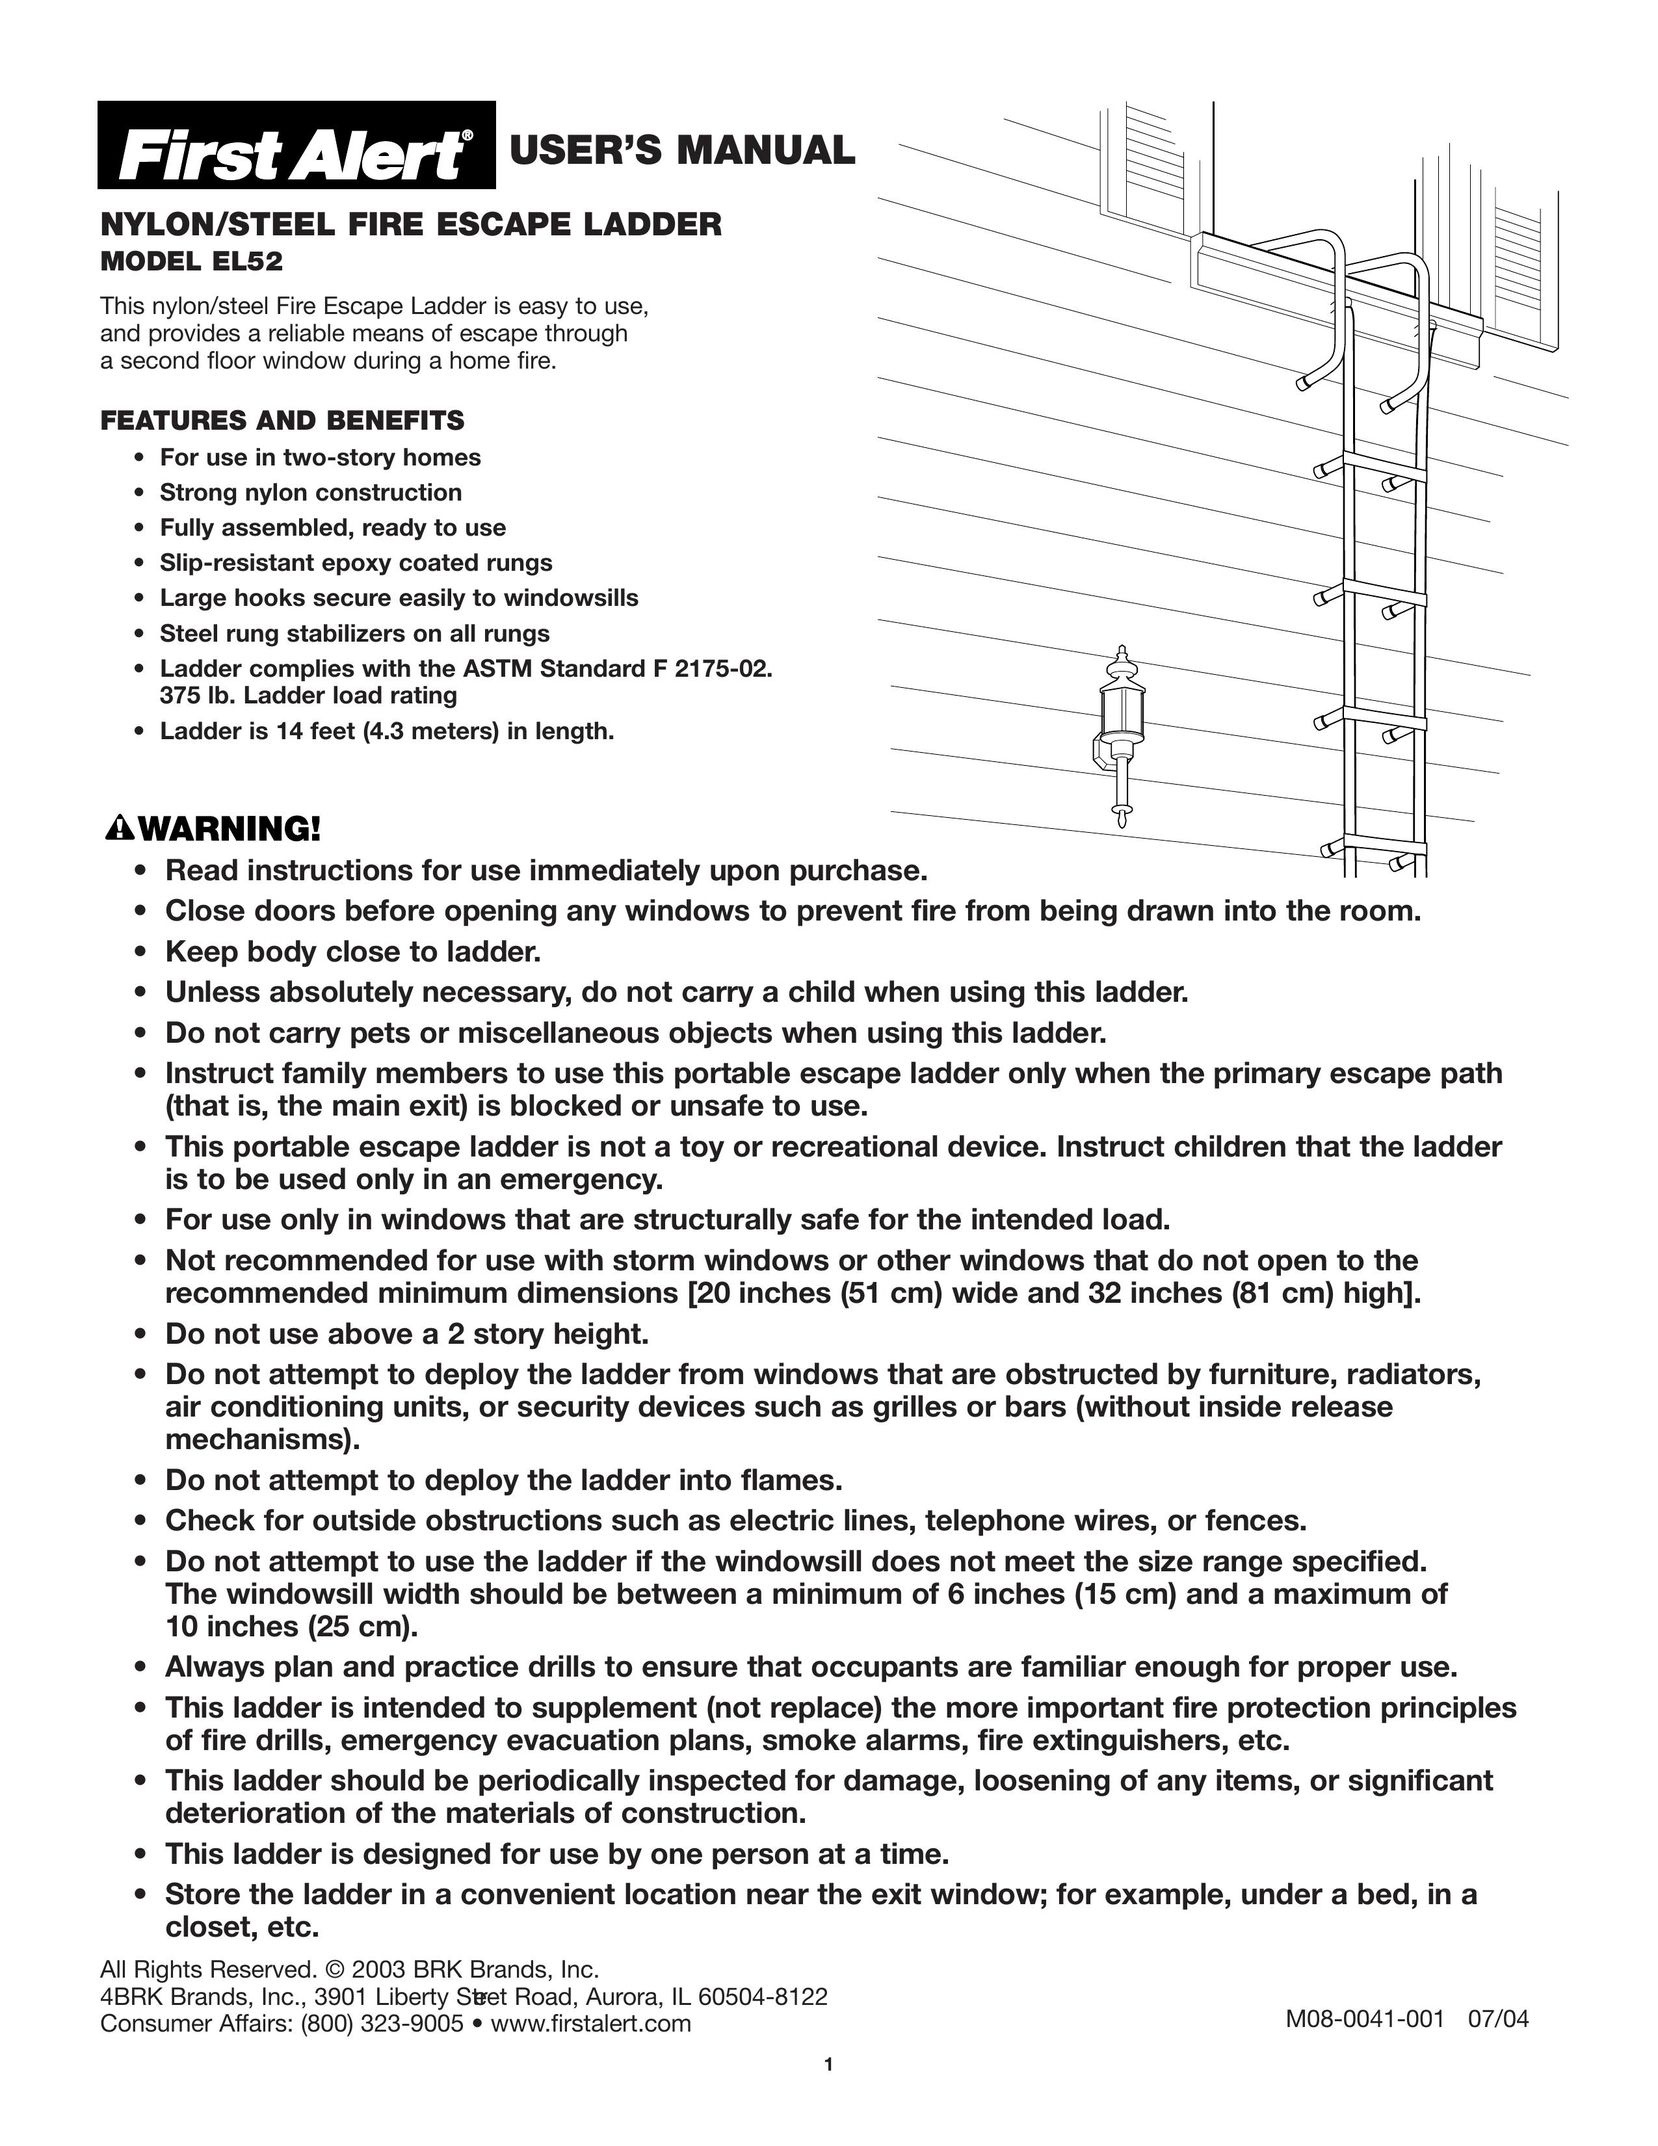 BRK electronic EL52 Home Safety Product User Manual